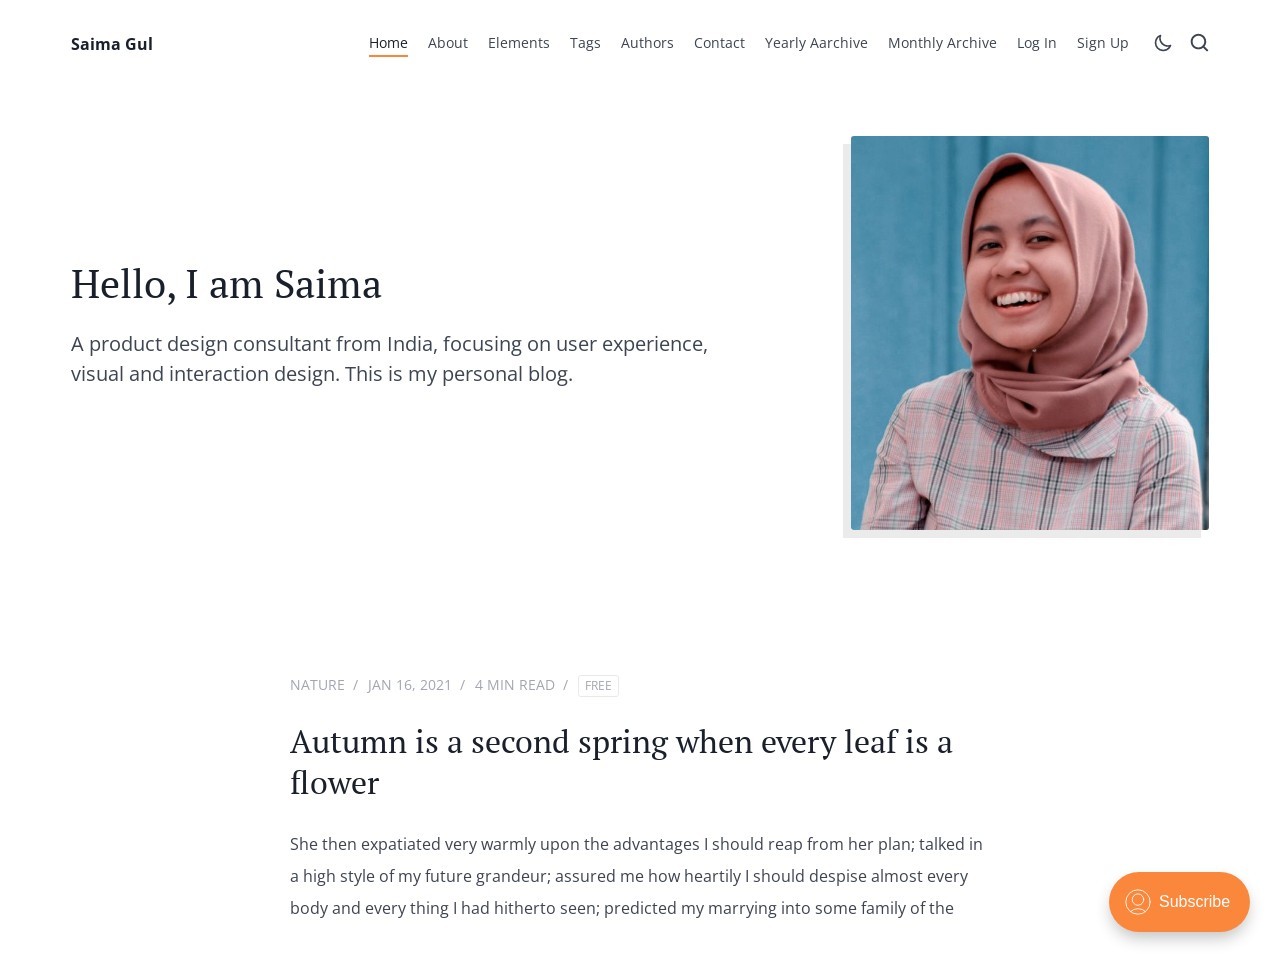 Saima - Ghost Theme for Personal or Professional Blog